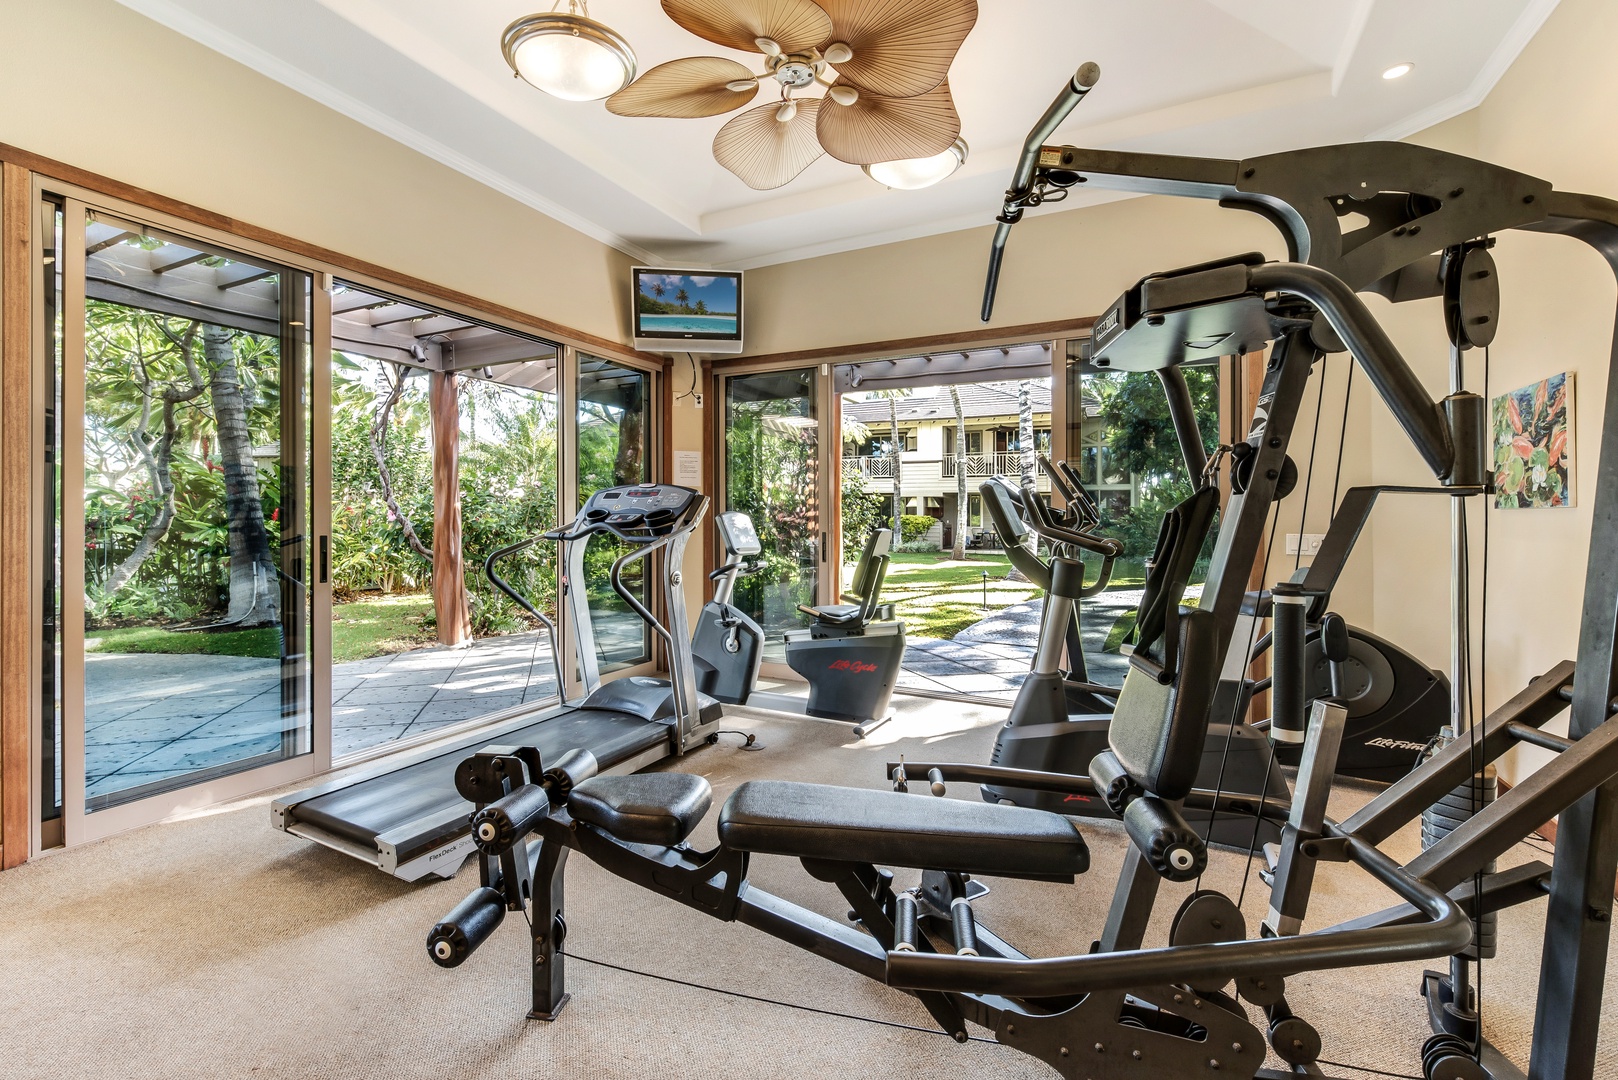 Kamuela Vacation Rentals, Palm Villas E1 - Palm Villas Fitness Center, Located Next to the Pool